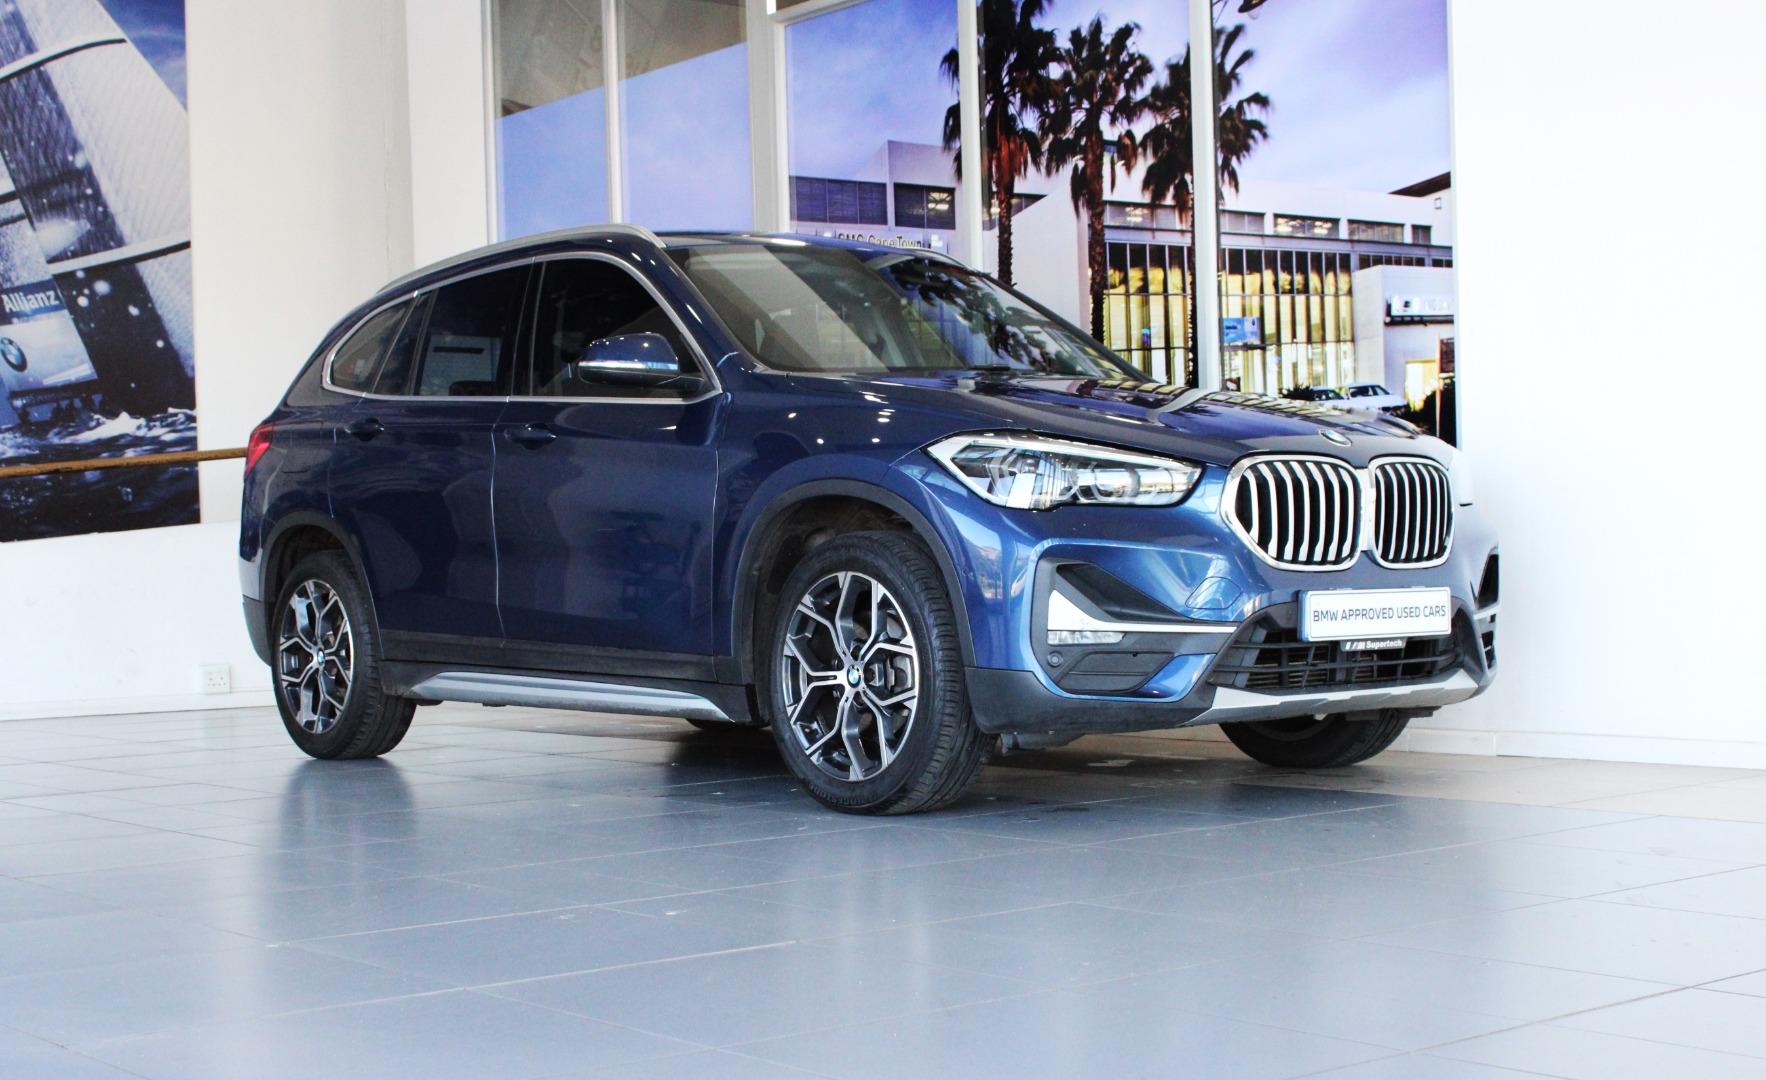 2020 BMW X1 sDRIVE18i xLINE A/T (F48)  for sale - SMG12|USED|115383